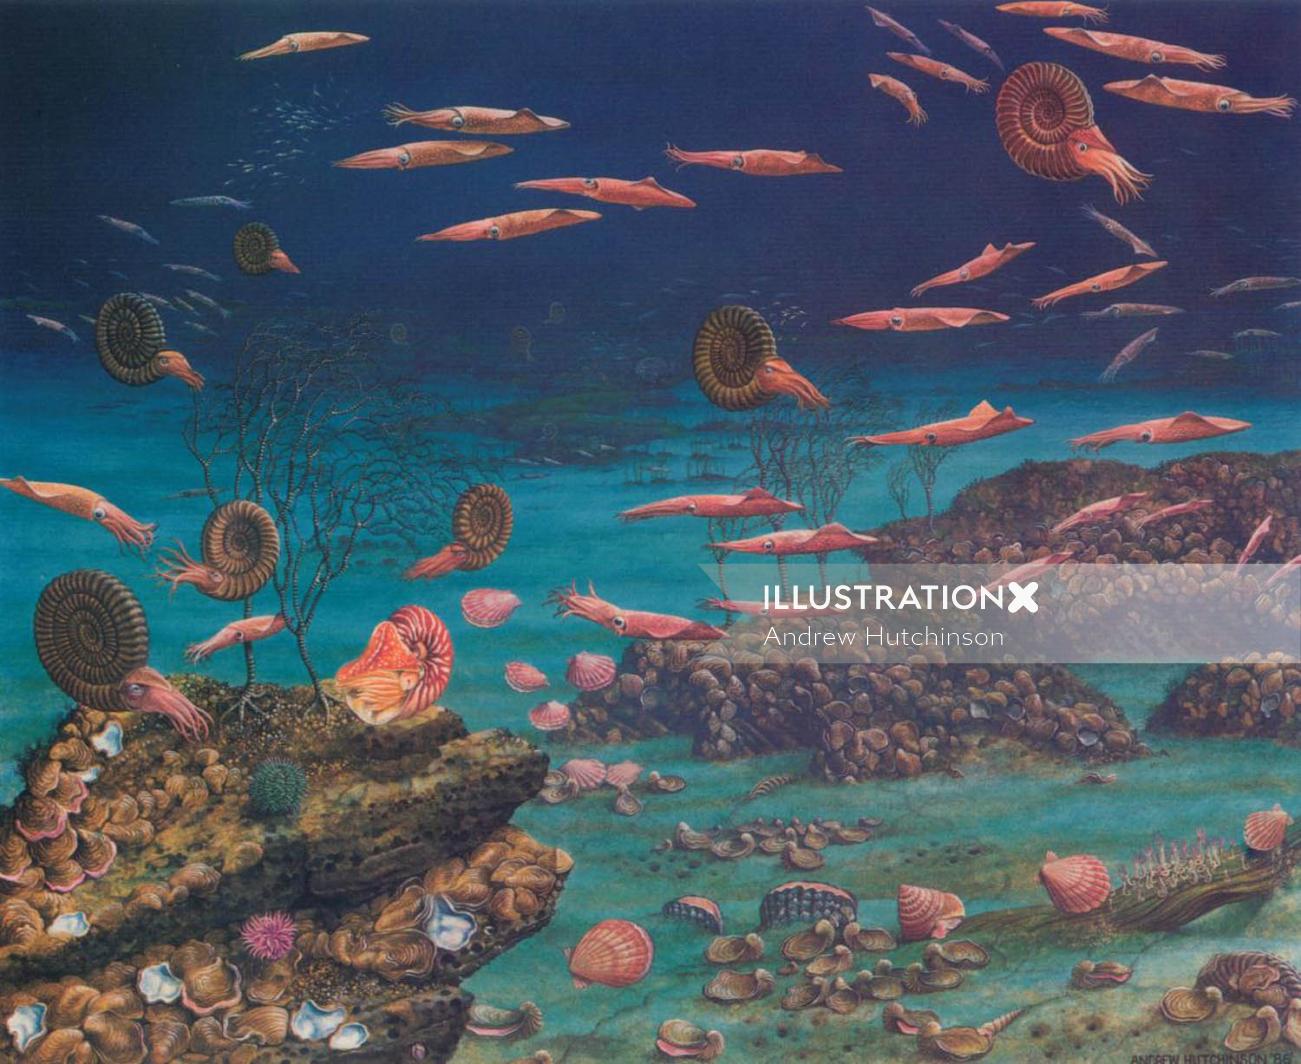 Underwater Deep Sea with various water creatures - painting by Andrew Hutchinson